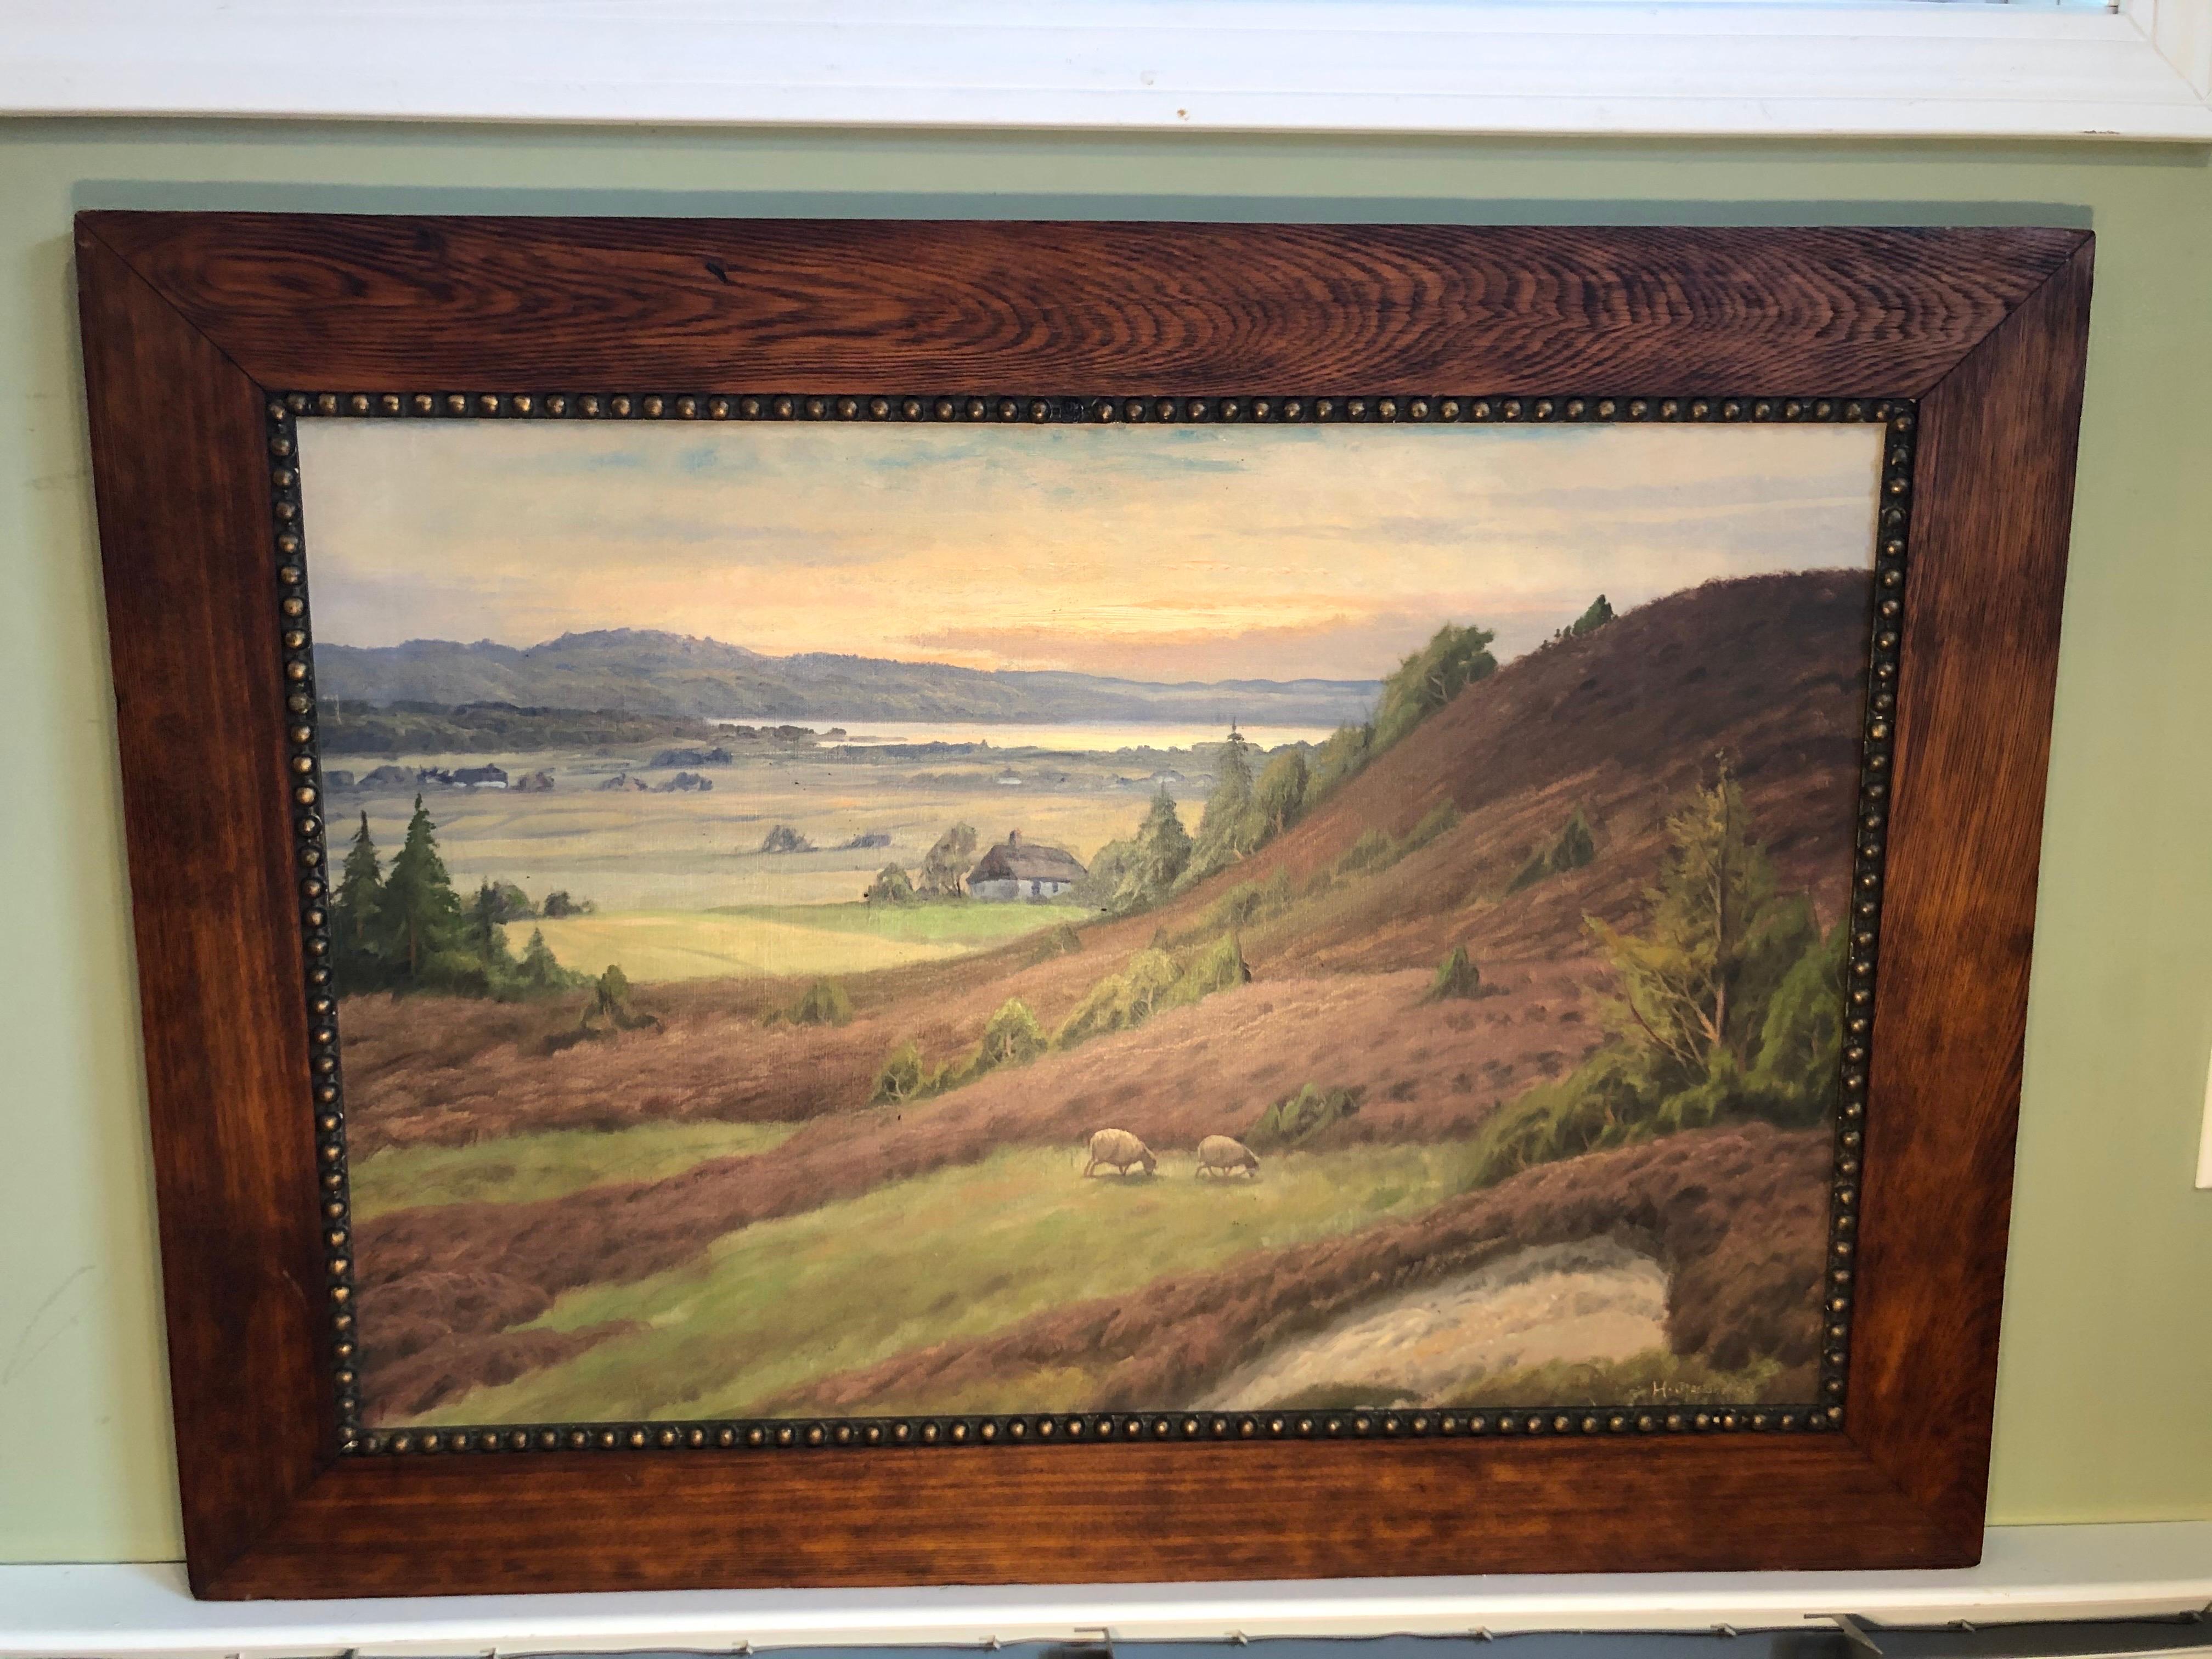 Early Arts and Crafts Sweeping Landscape of Countryside. Romantic rolling fields with sheep and blue mountains in the distance. Perfect painting for above a stone fireplace with your arts and crafts pottery collection. Solid oak or ash wooden frame